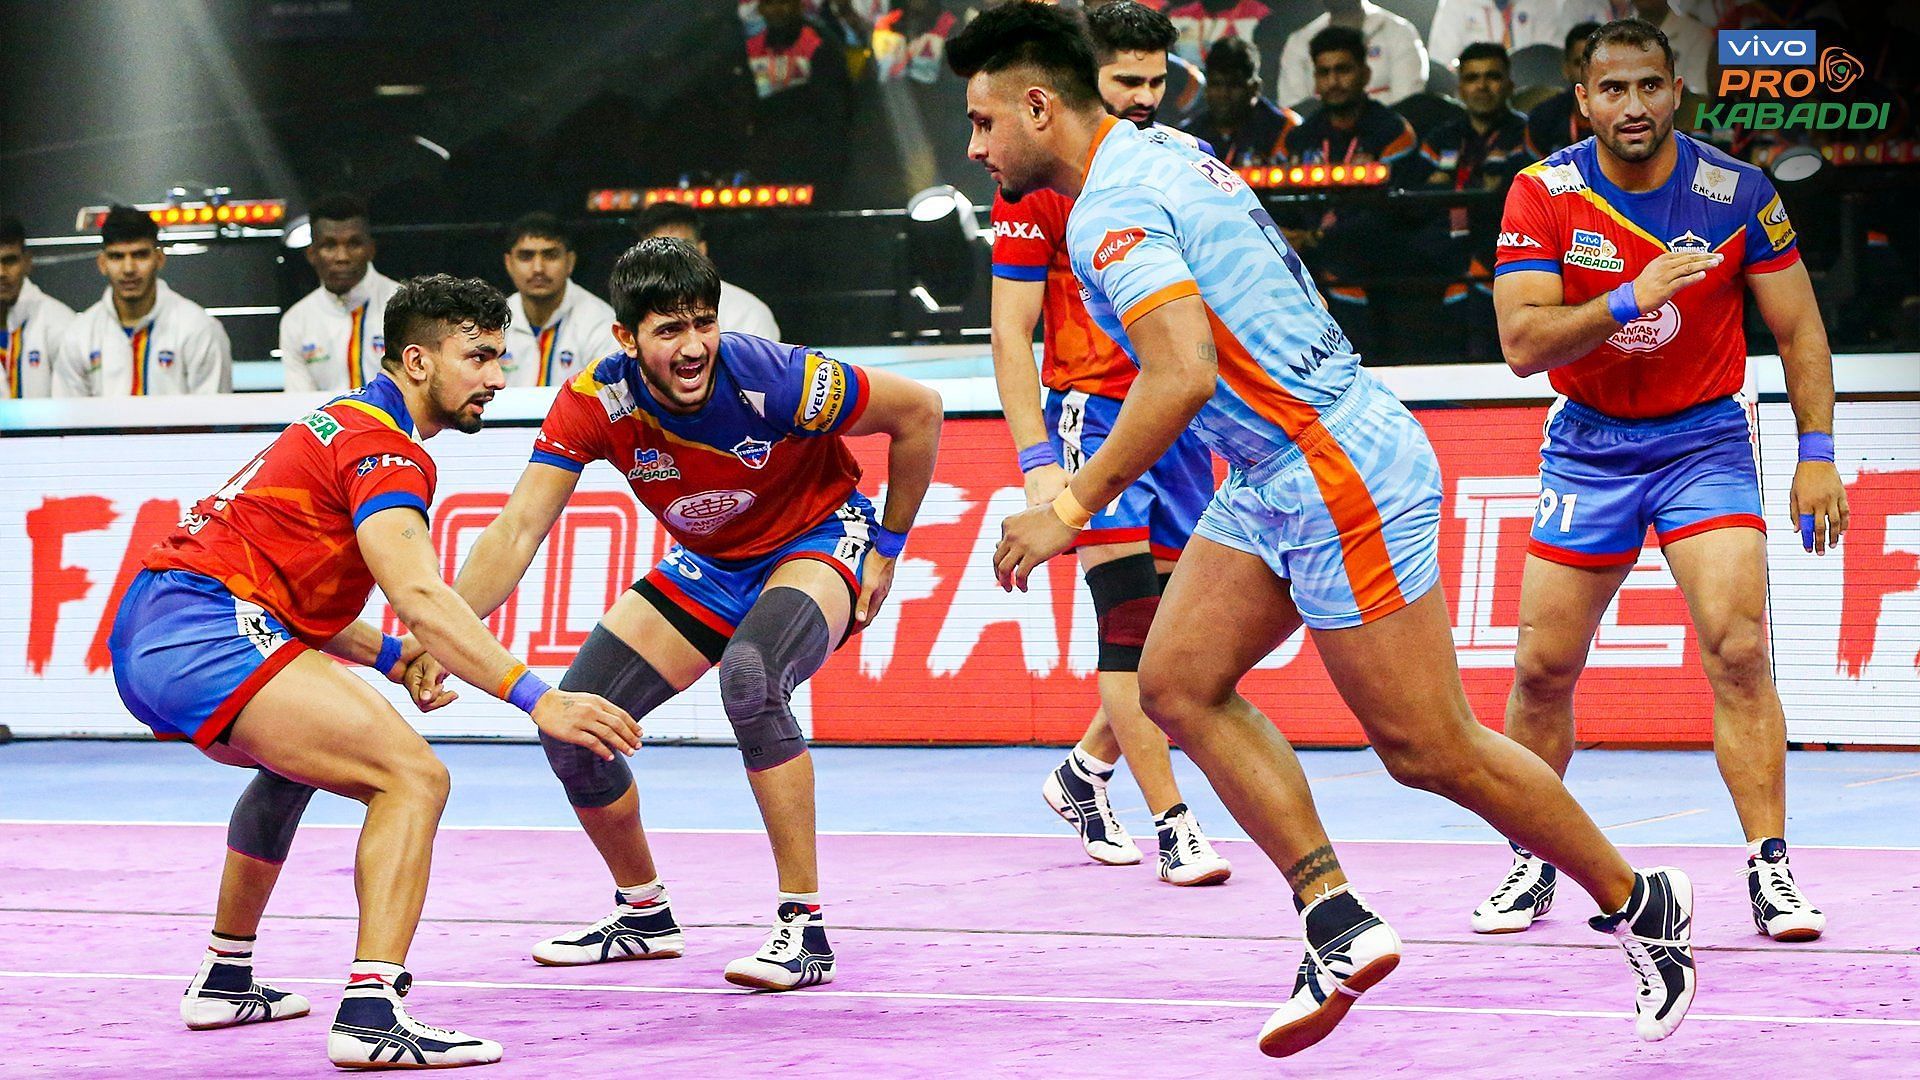 Maninder Singh&#039;s 10 points went in vain as Bengal Warriors lost the match (Image Courtesy: Pro Kabaddi League)